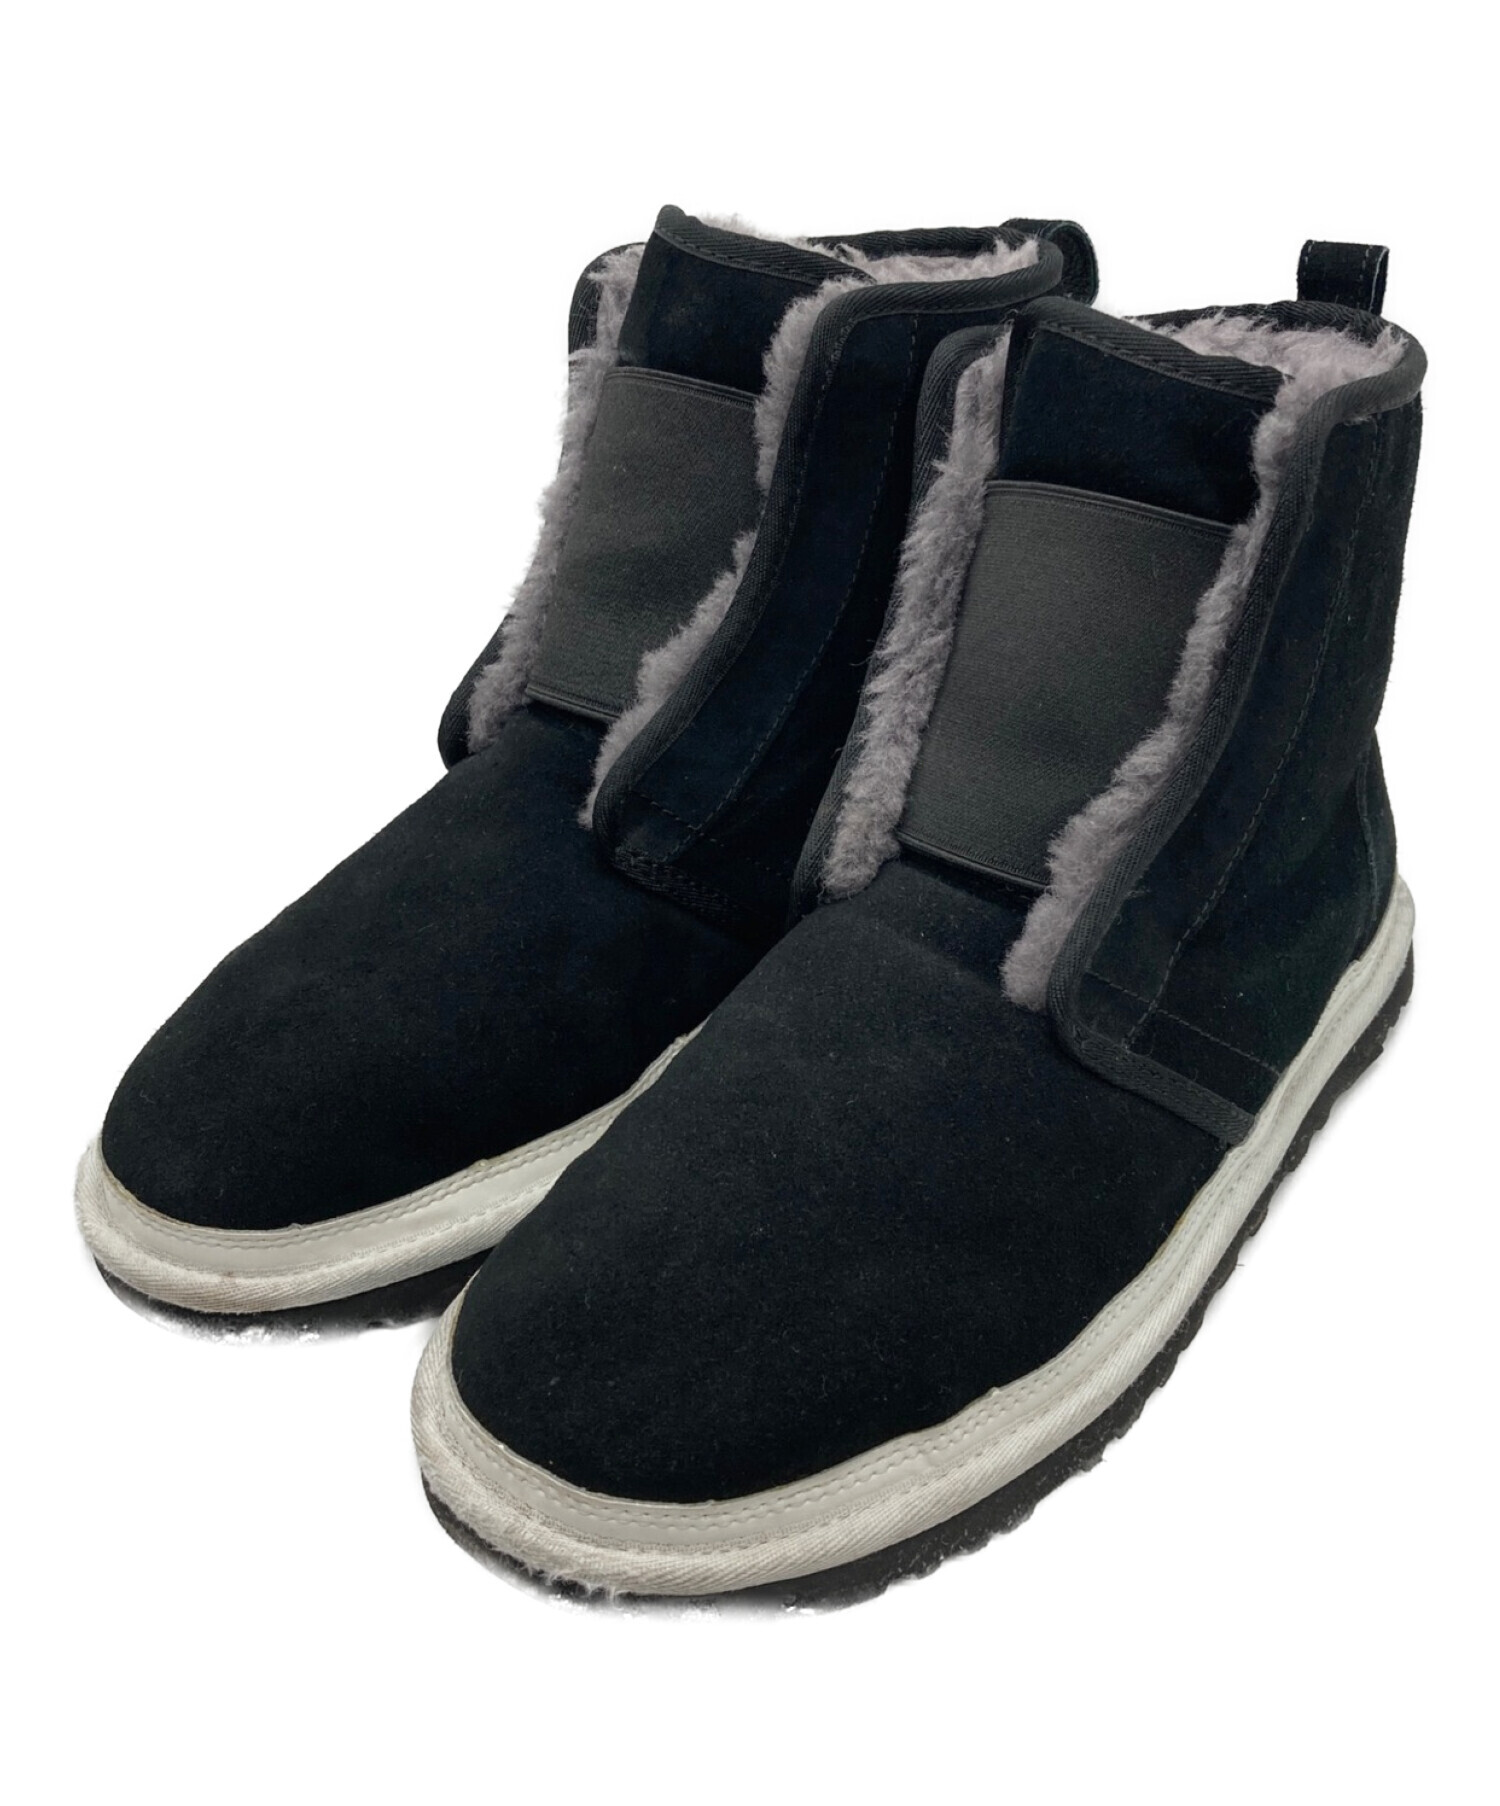 WHITE MOUNTAINEERING UGG SNOW BOOTS